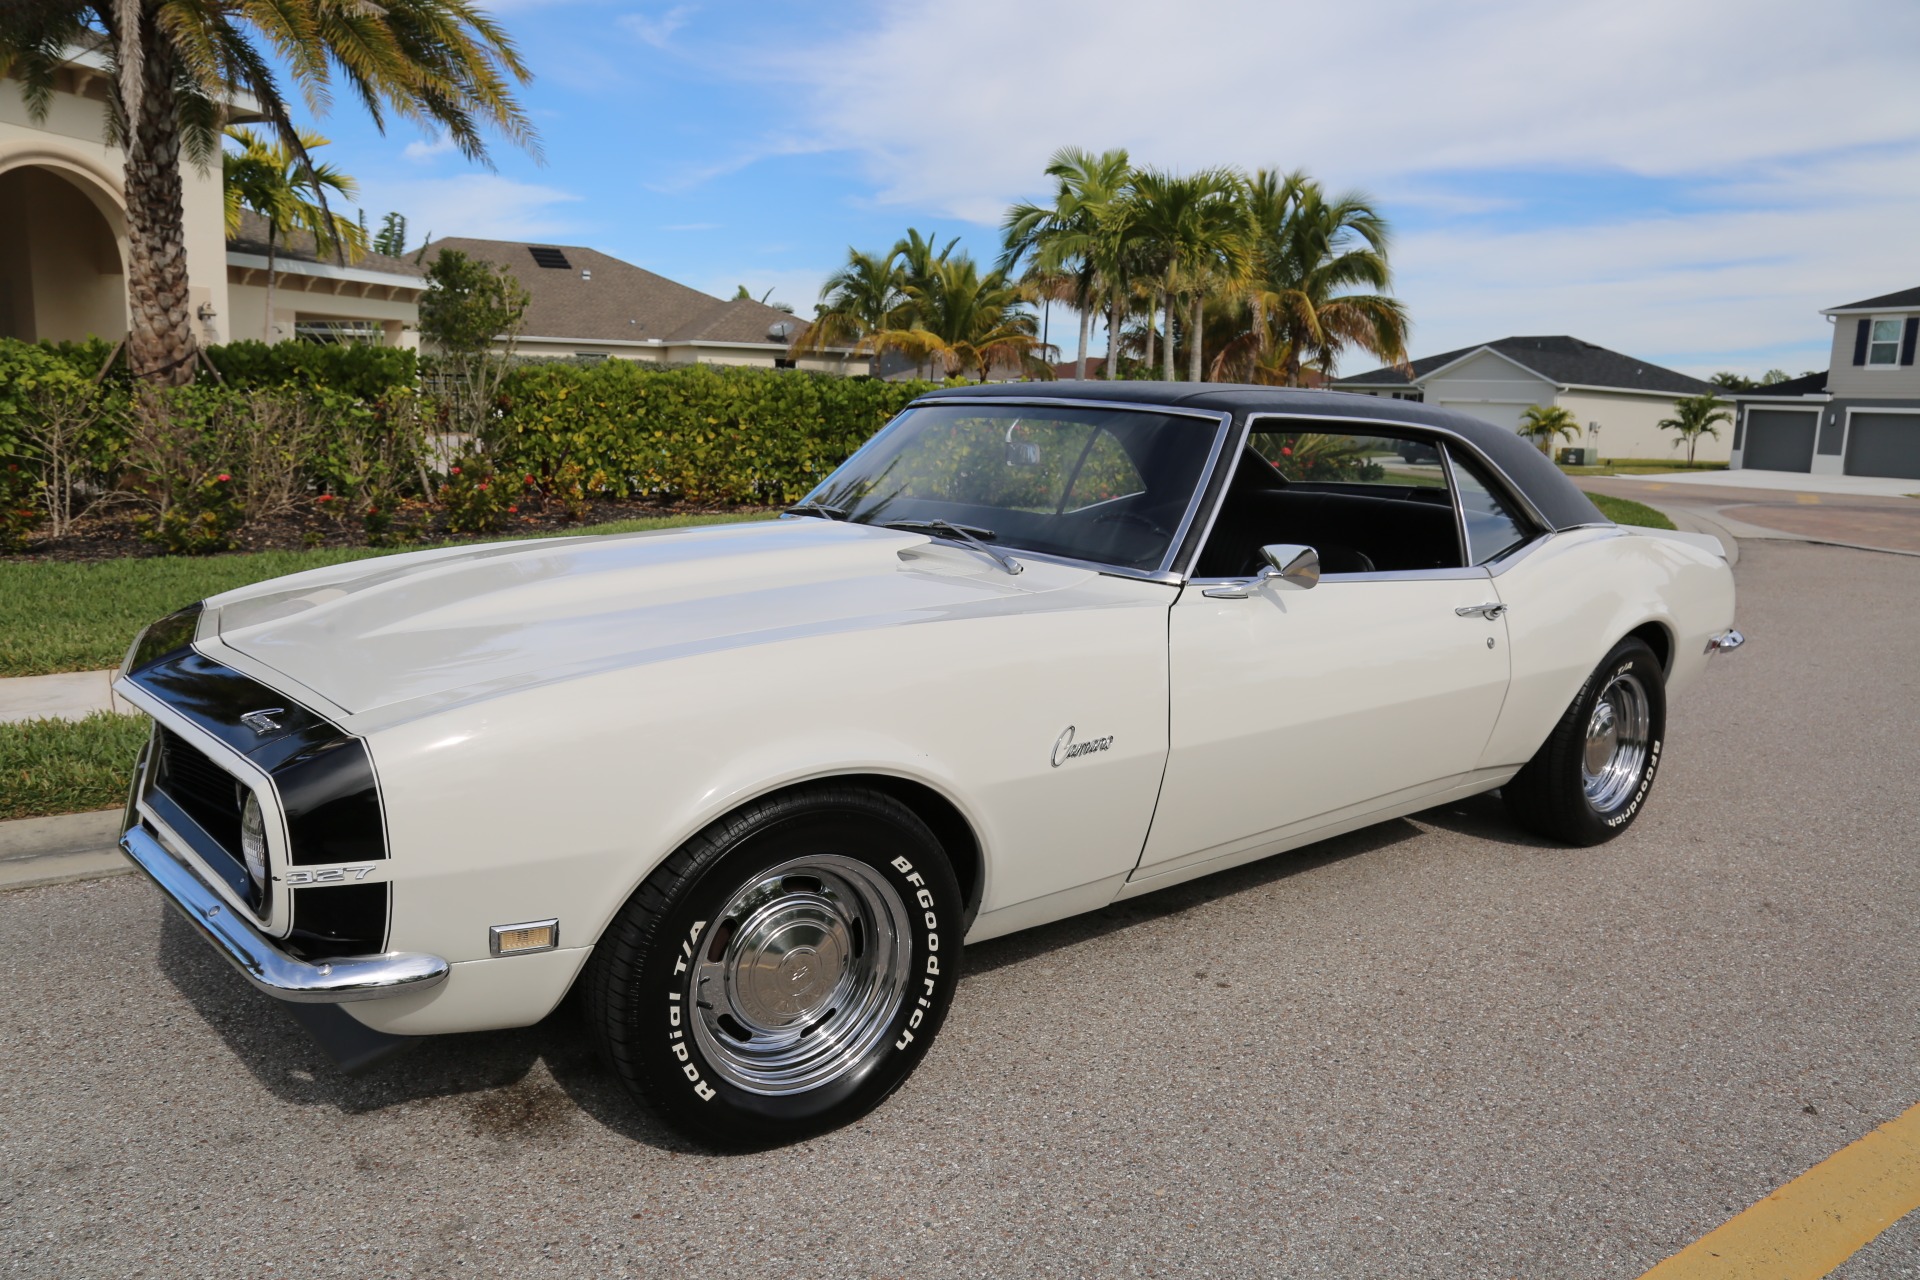 Used 1968 Chevy Camaro 327 V8 Auto # Match for sale Sold at Muscle Cars for Sale Inc. in Fort Myers FL 33912 5